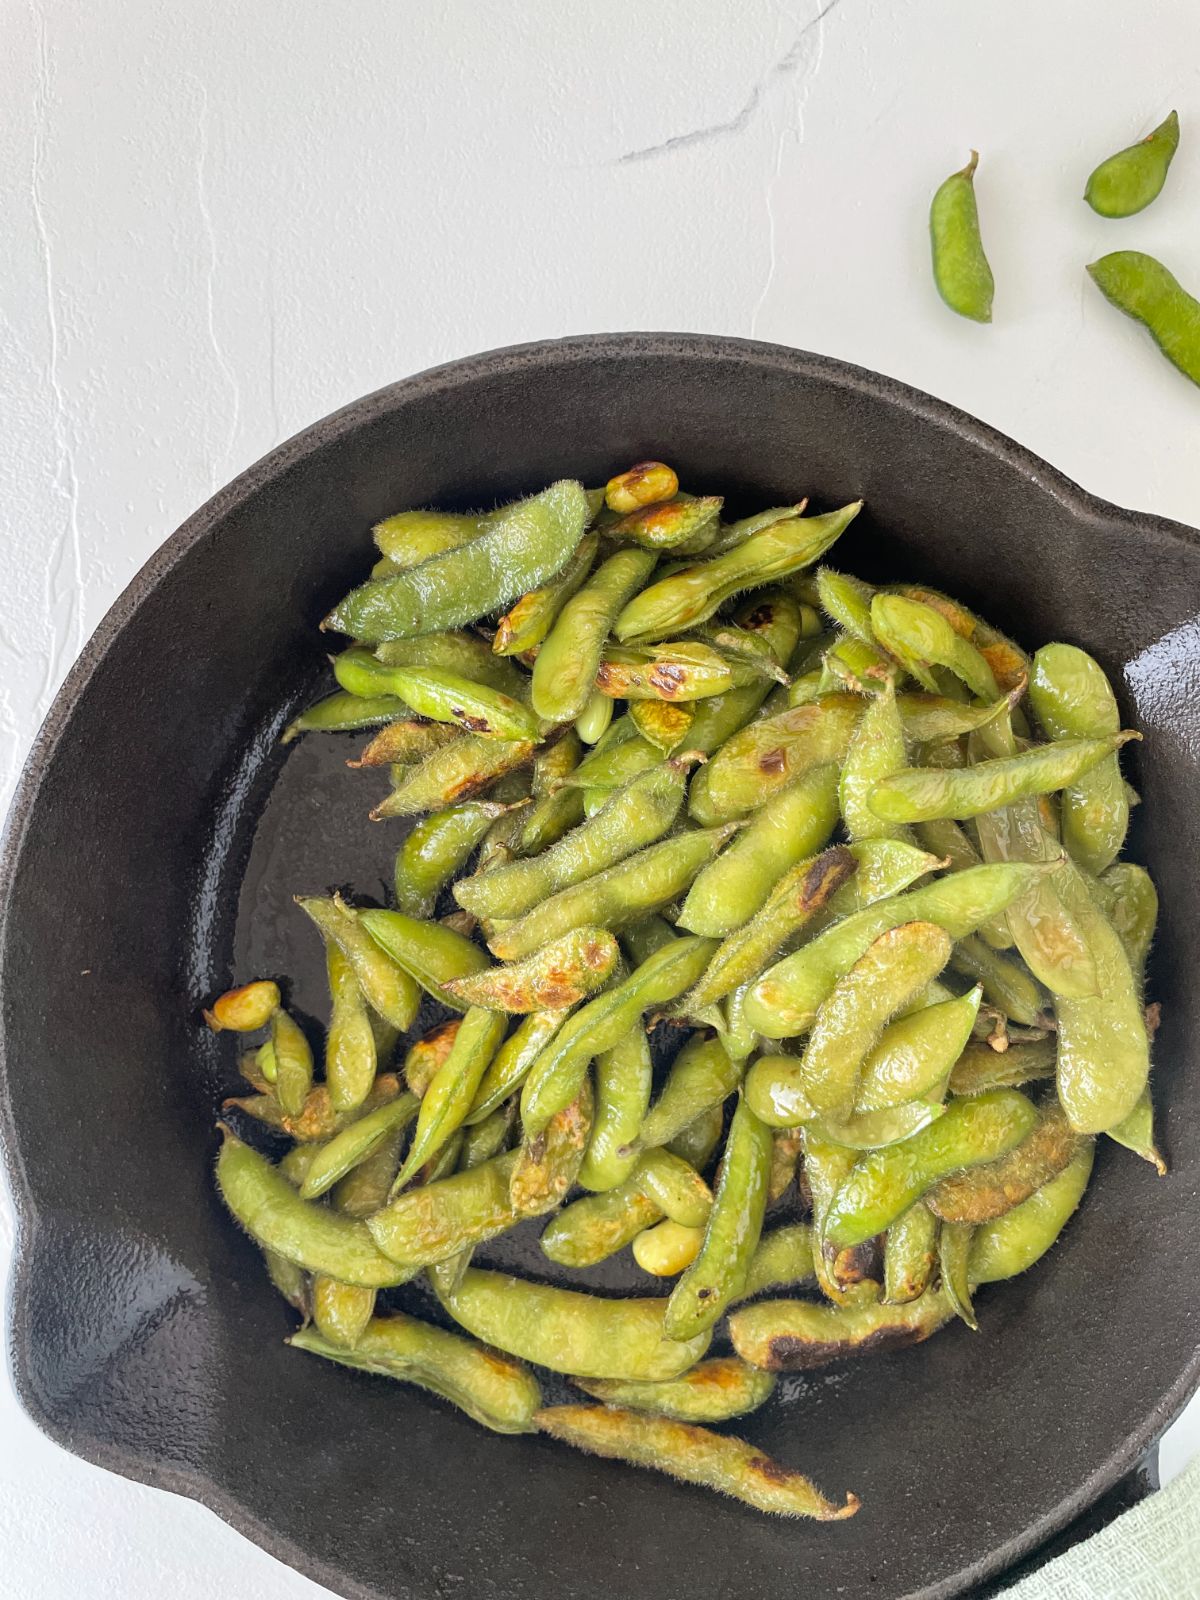 edamame being pan fried in a skillet